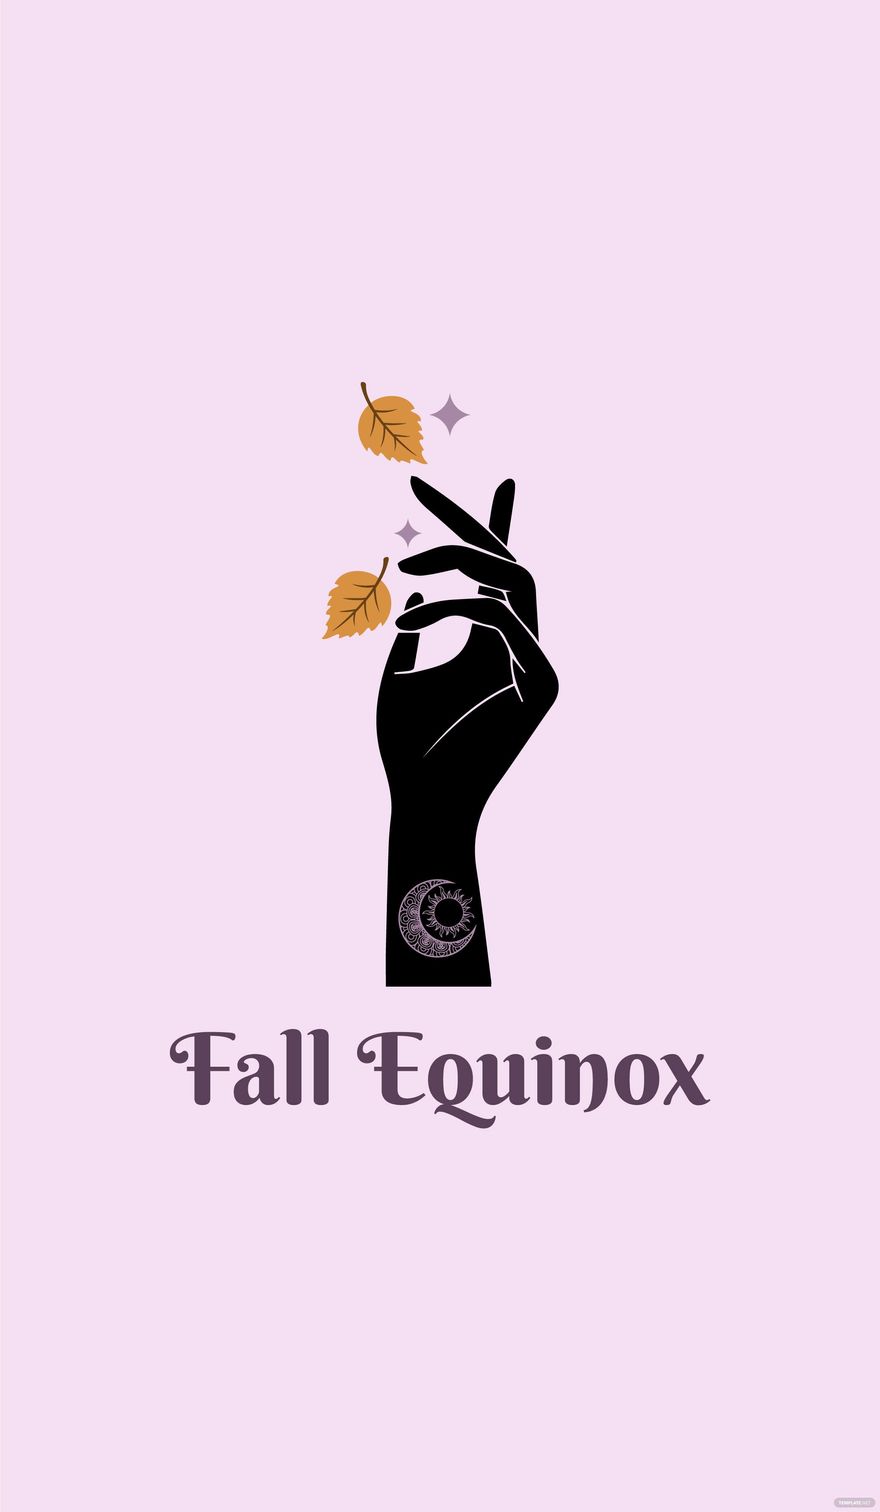 Fall Equinox iPhone Background in PDF, Illustrator, PSD, EPS, SVG, JPG, PNG